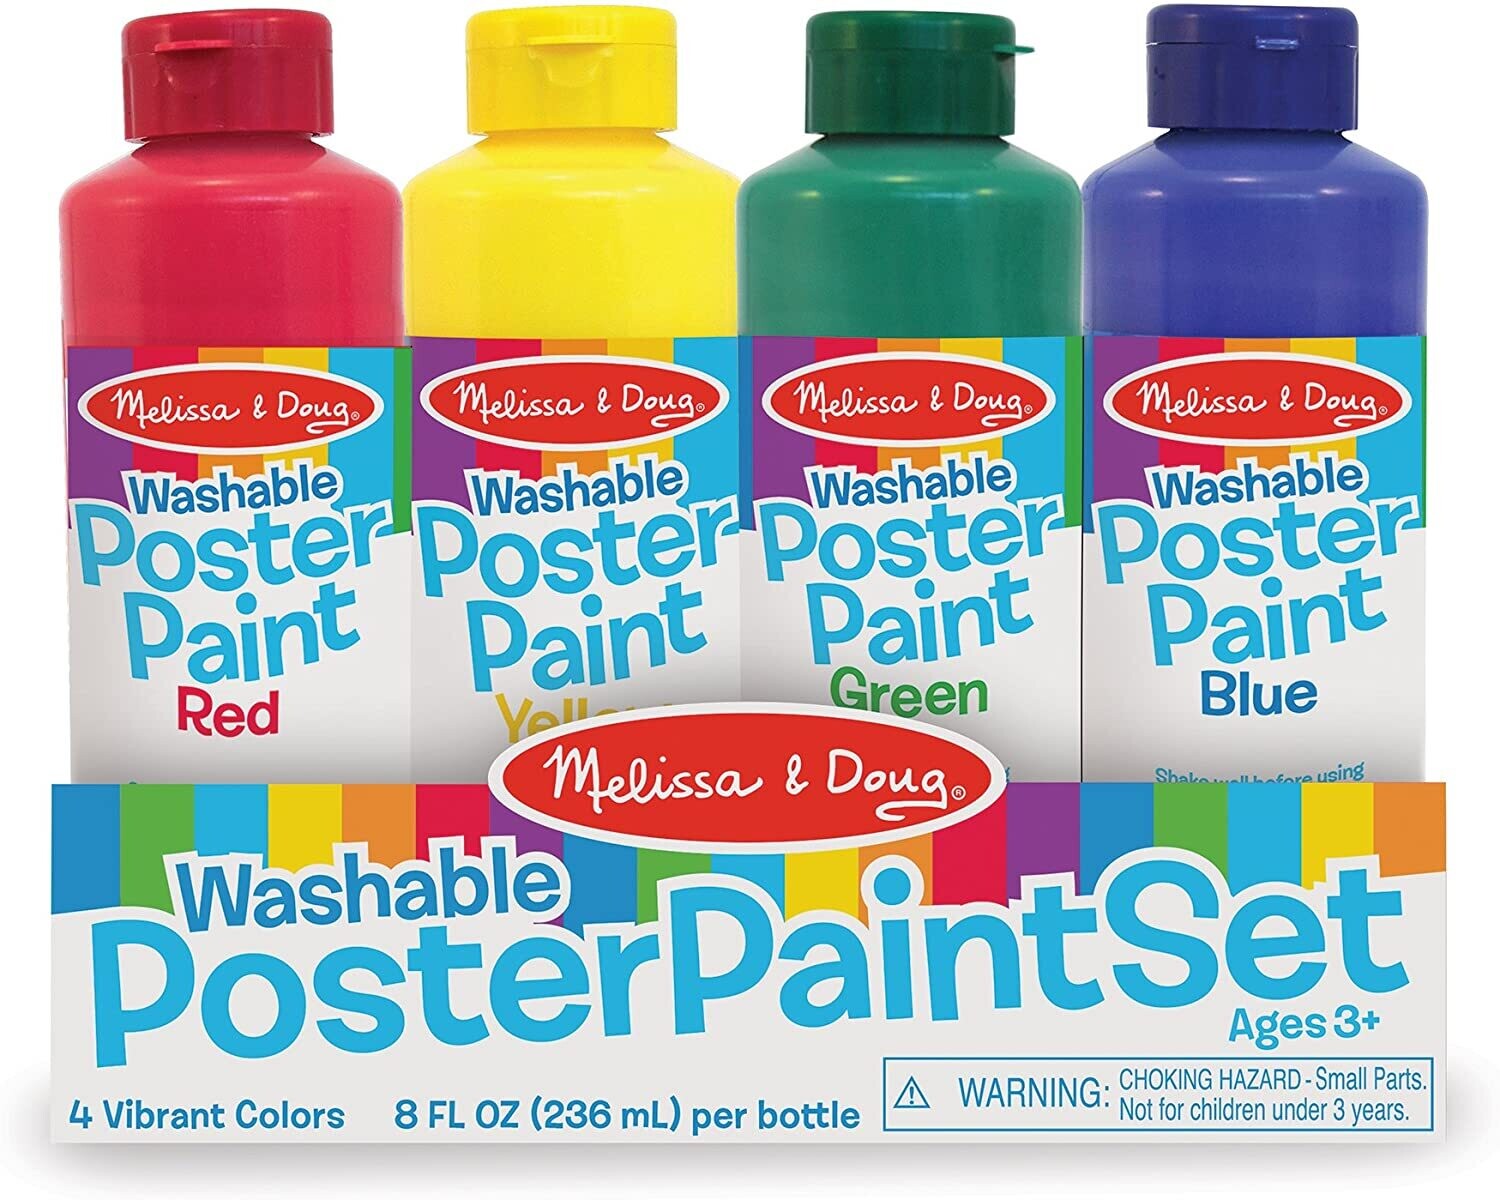 MD Poster Paint Set of 4